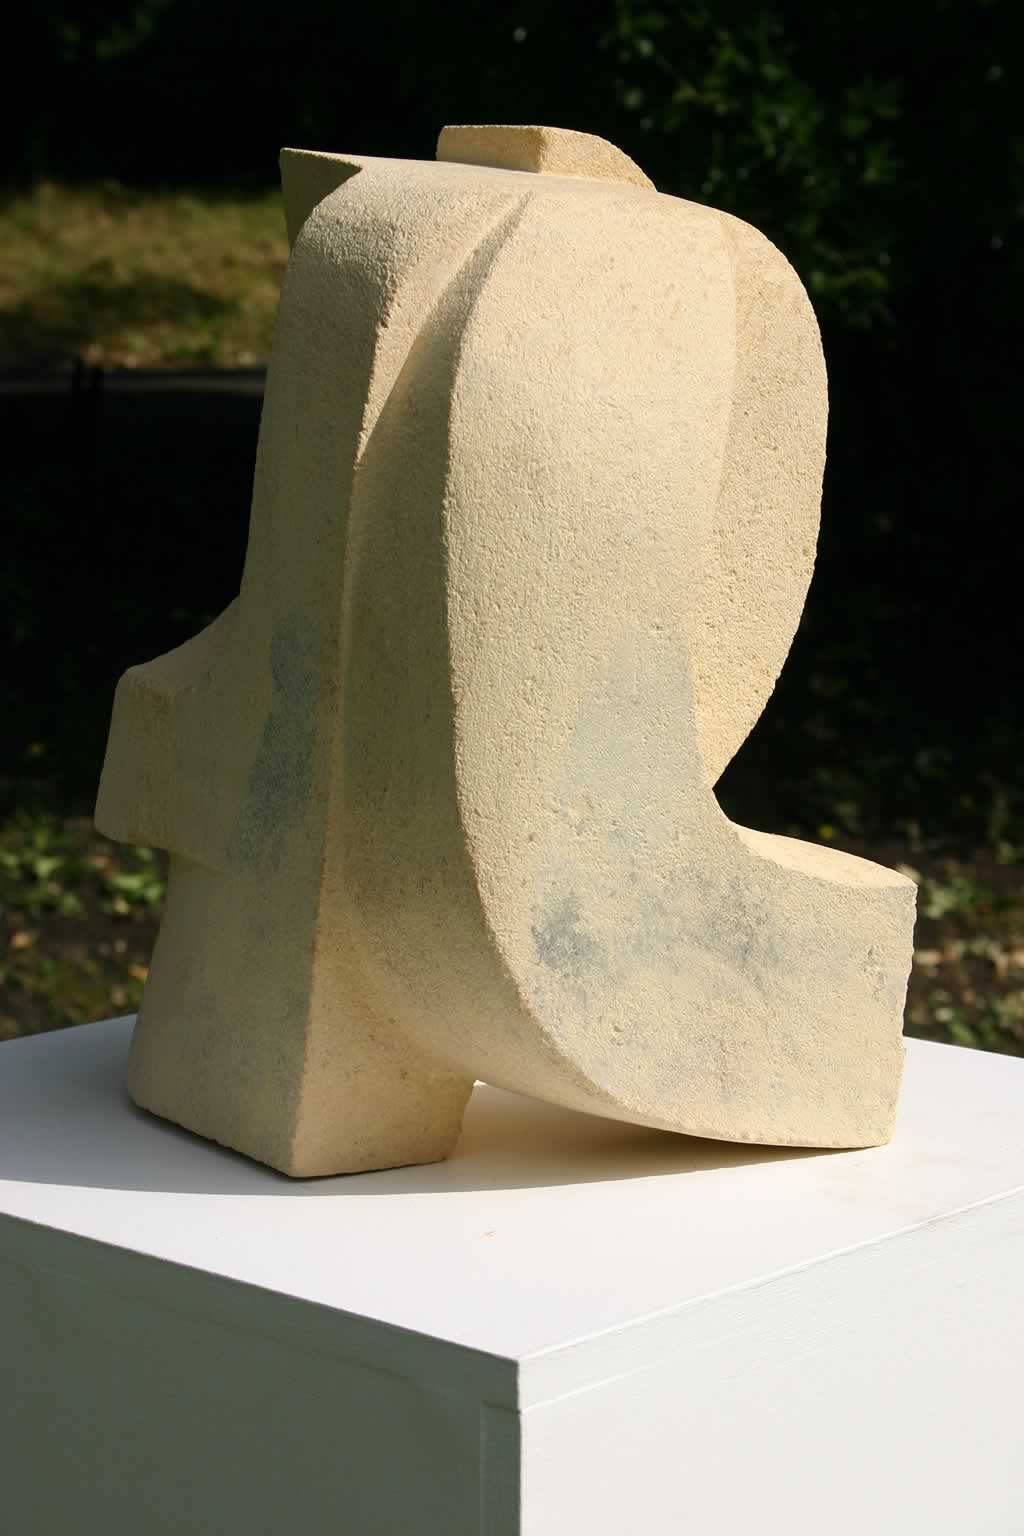 Monism (abstract sculpture) by sculptor Ian Campbell-Briggs